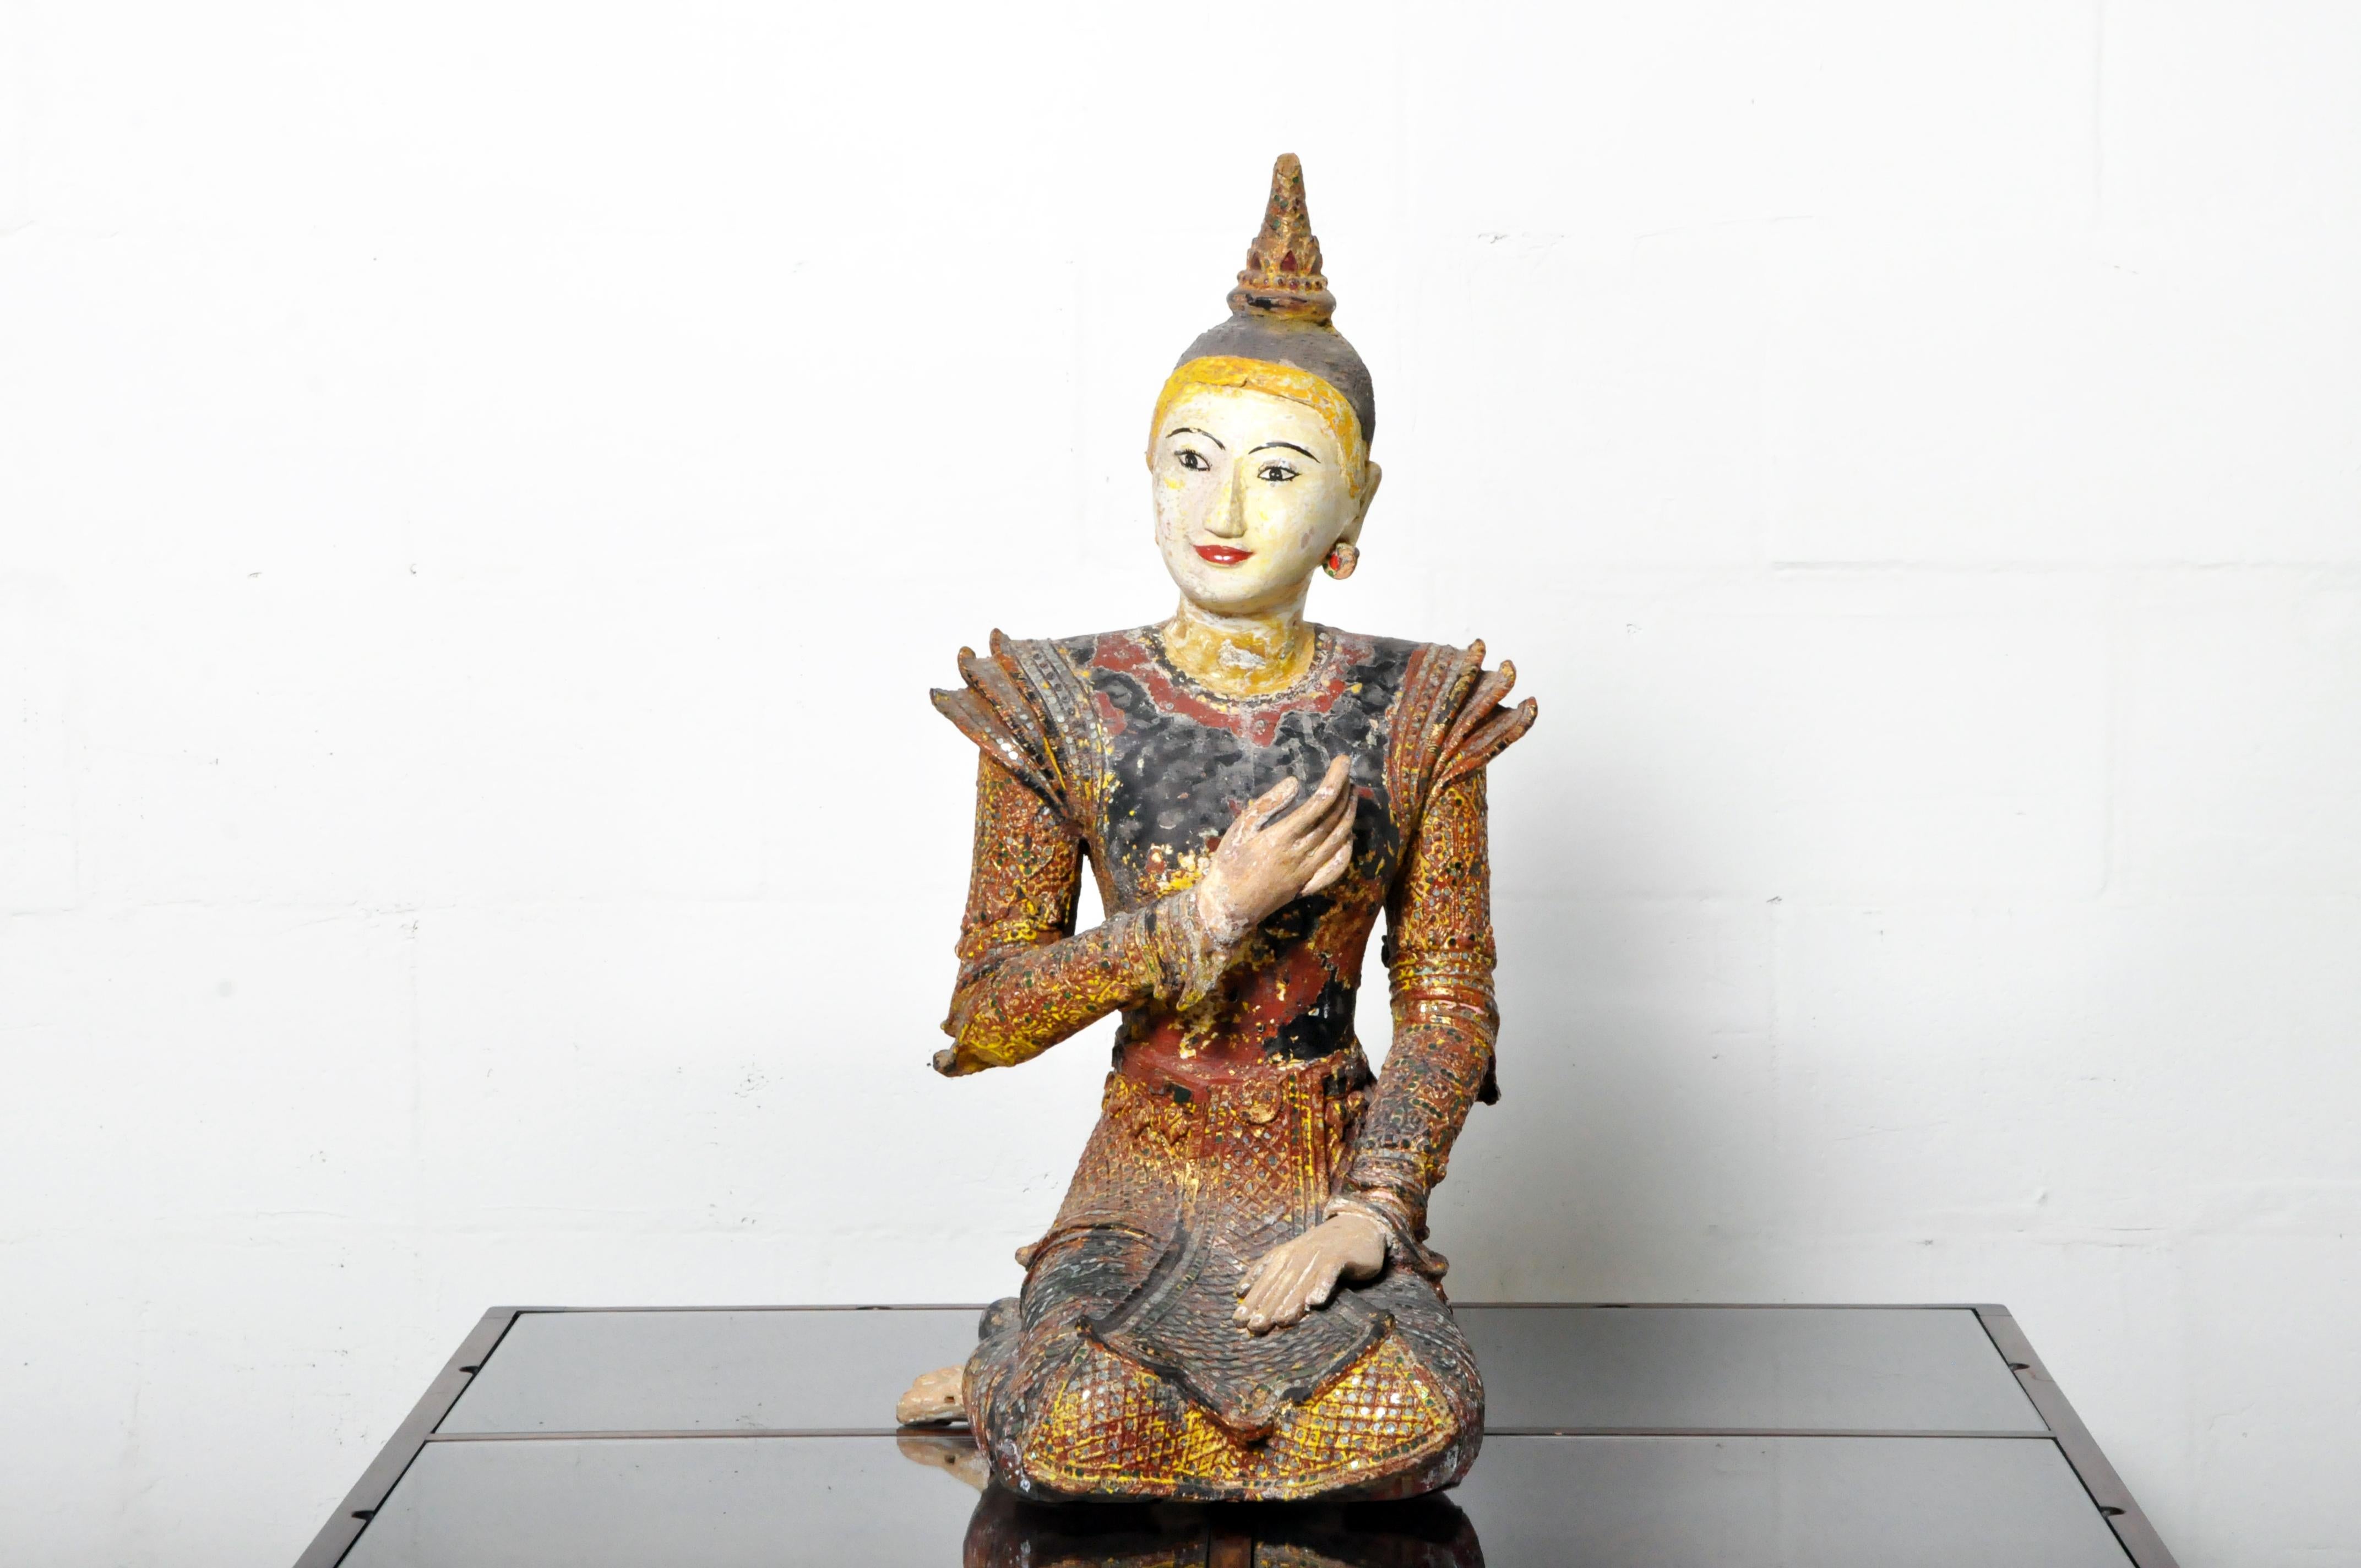 A finely carved wooden sculpture of a Buddhist angel in the Northern Thai style. It is covered in natural lacquer, gold leaf, polychrome, and glass mirror 